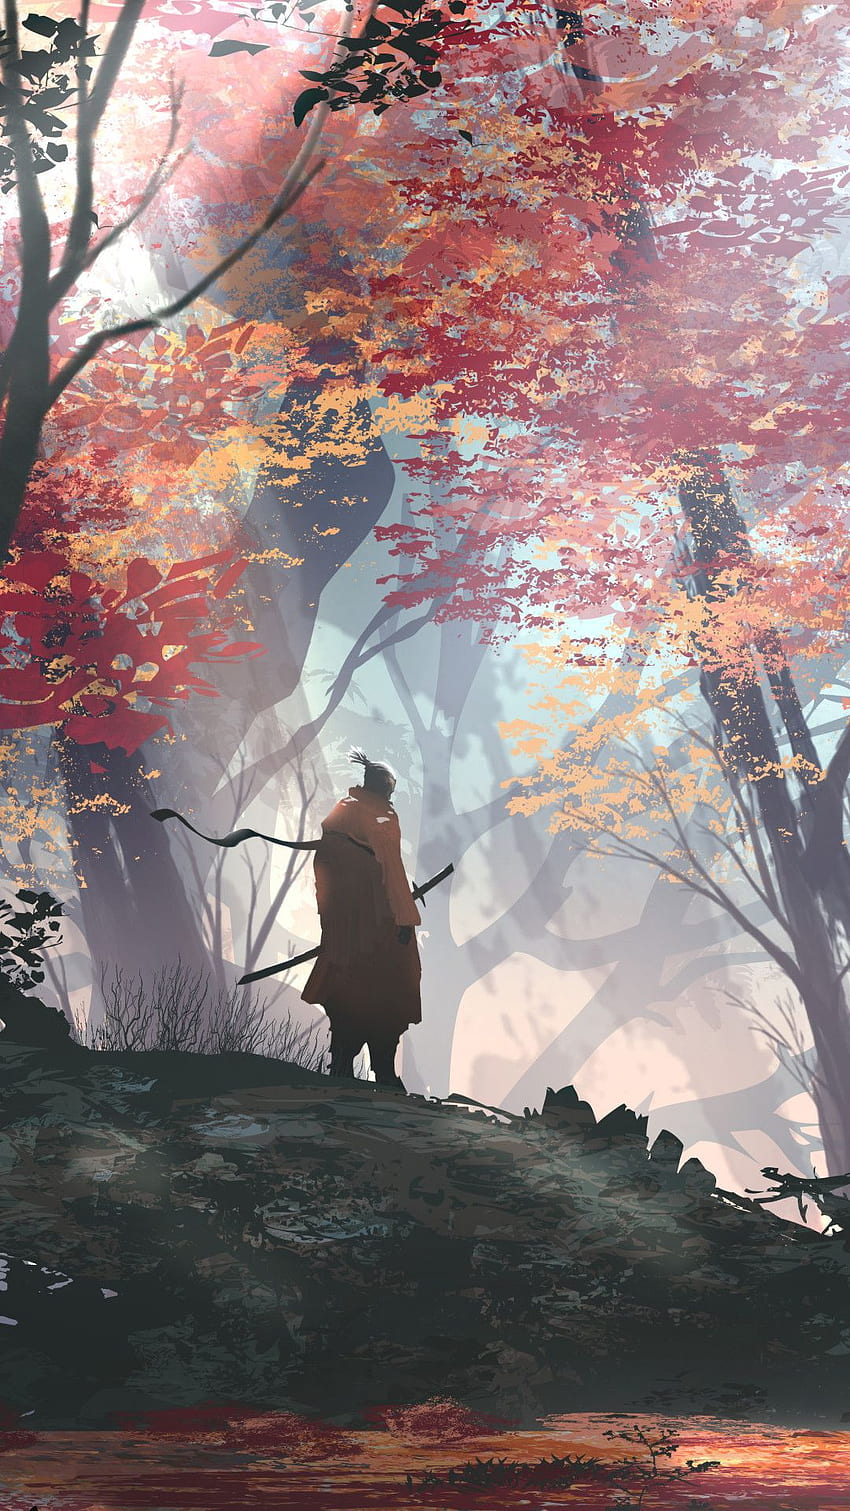 1080P Free download | Sekiro Shadows Die Twice Mobile (iPhone, Android ...